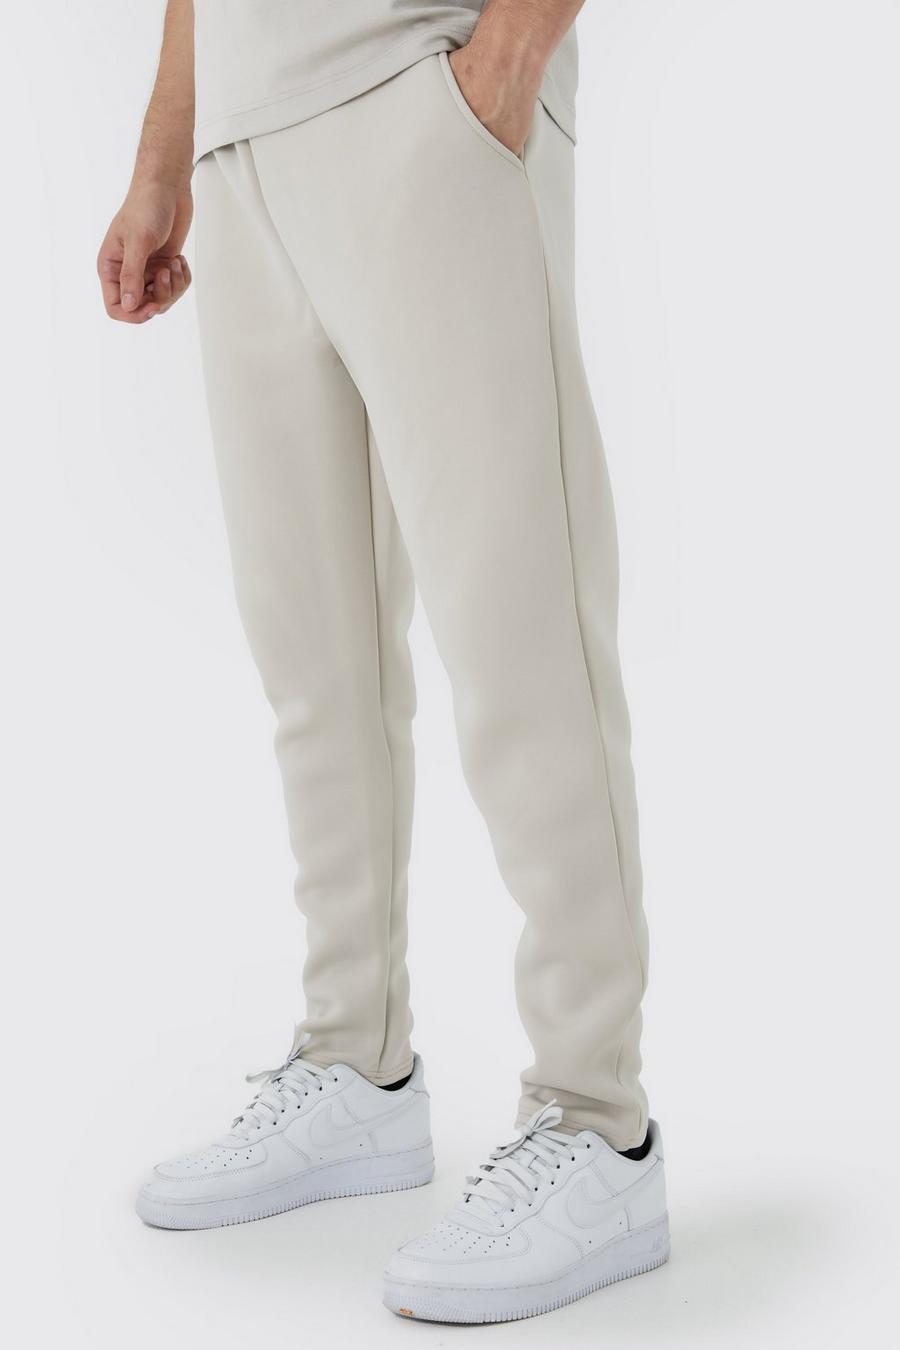 Stone Tall Slim Tapered Cropped Bonded Scuba Sweatpant